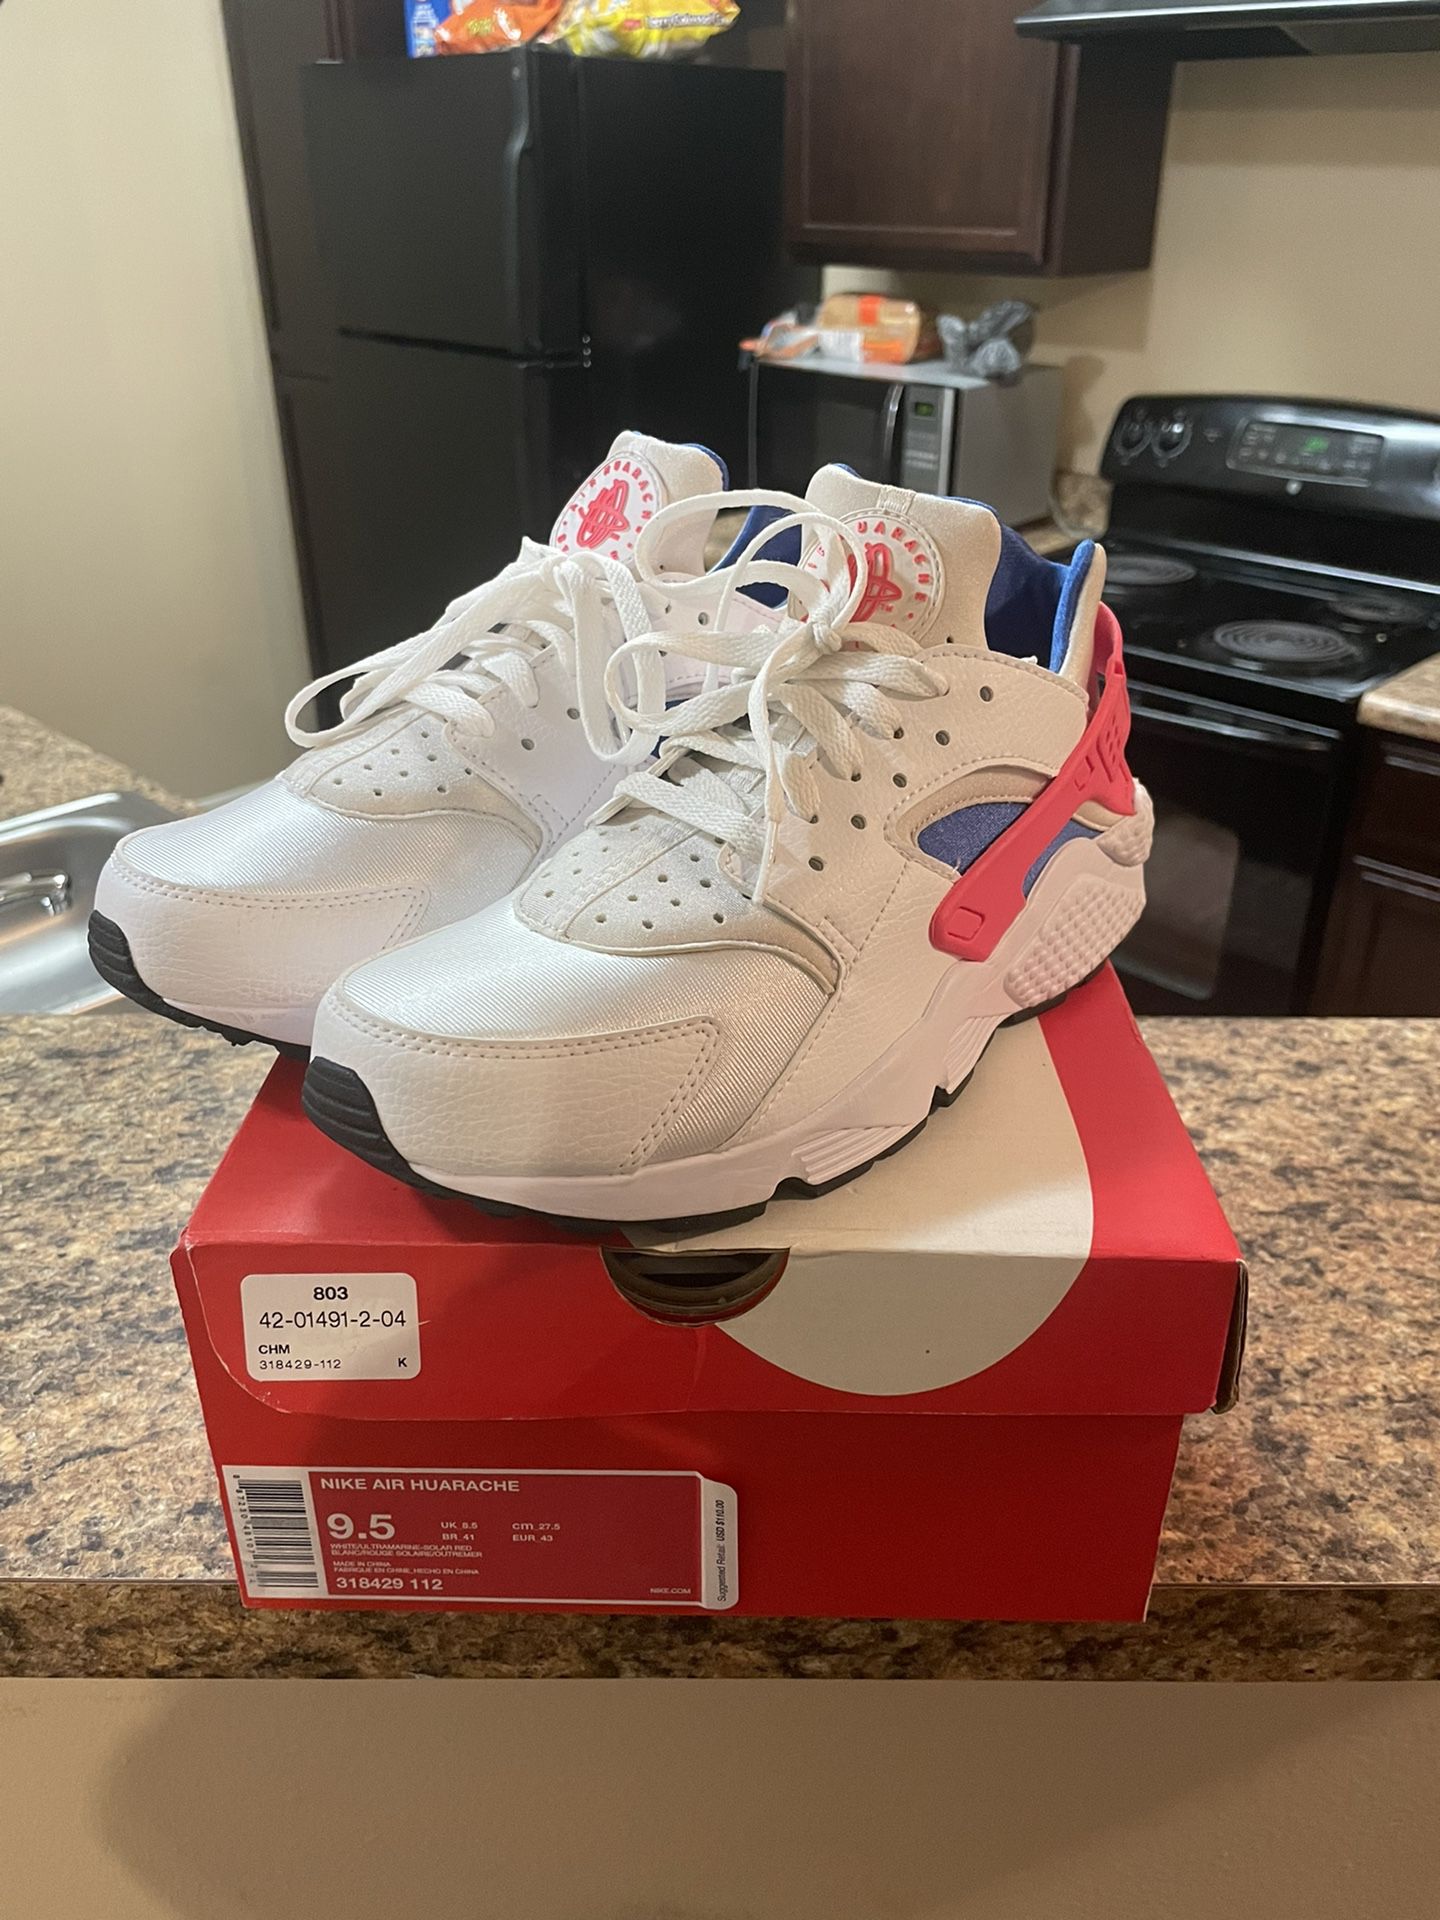 Impasse Waar Indica Nike Huarache Size 9.5 for Sale in Youngstown, OH - OfferUp